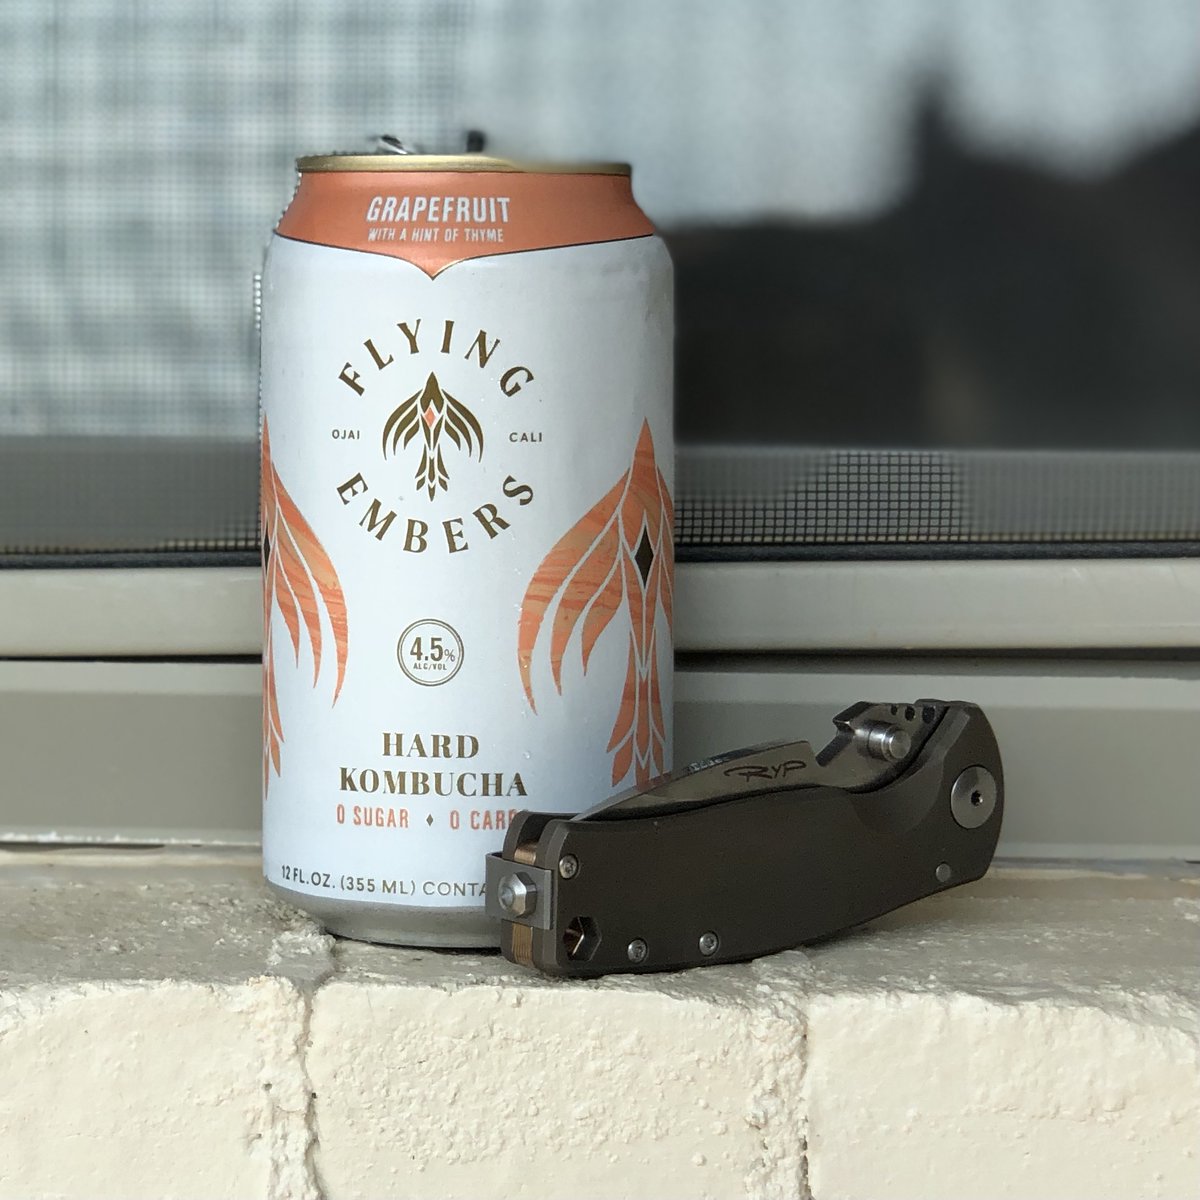 Posing the long sold out @dpxgear bronze HEST/F Urban with copper #mokume spacer. Before there was hammertone, us #copper fans snagged this one. 
/
\
/
\
#straack #geardialedin #hestfurban #hardkombucha #americanmadeedc @flyingembersbrew